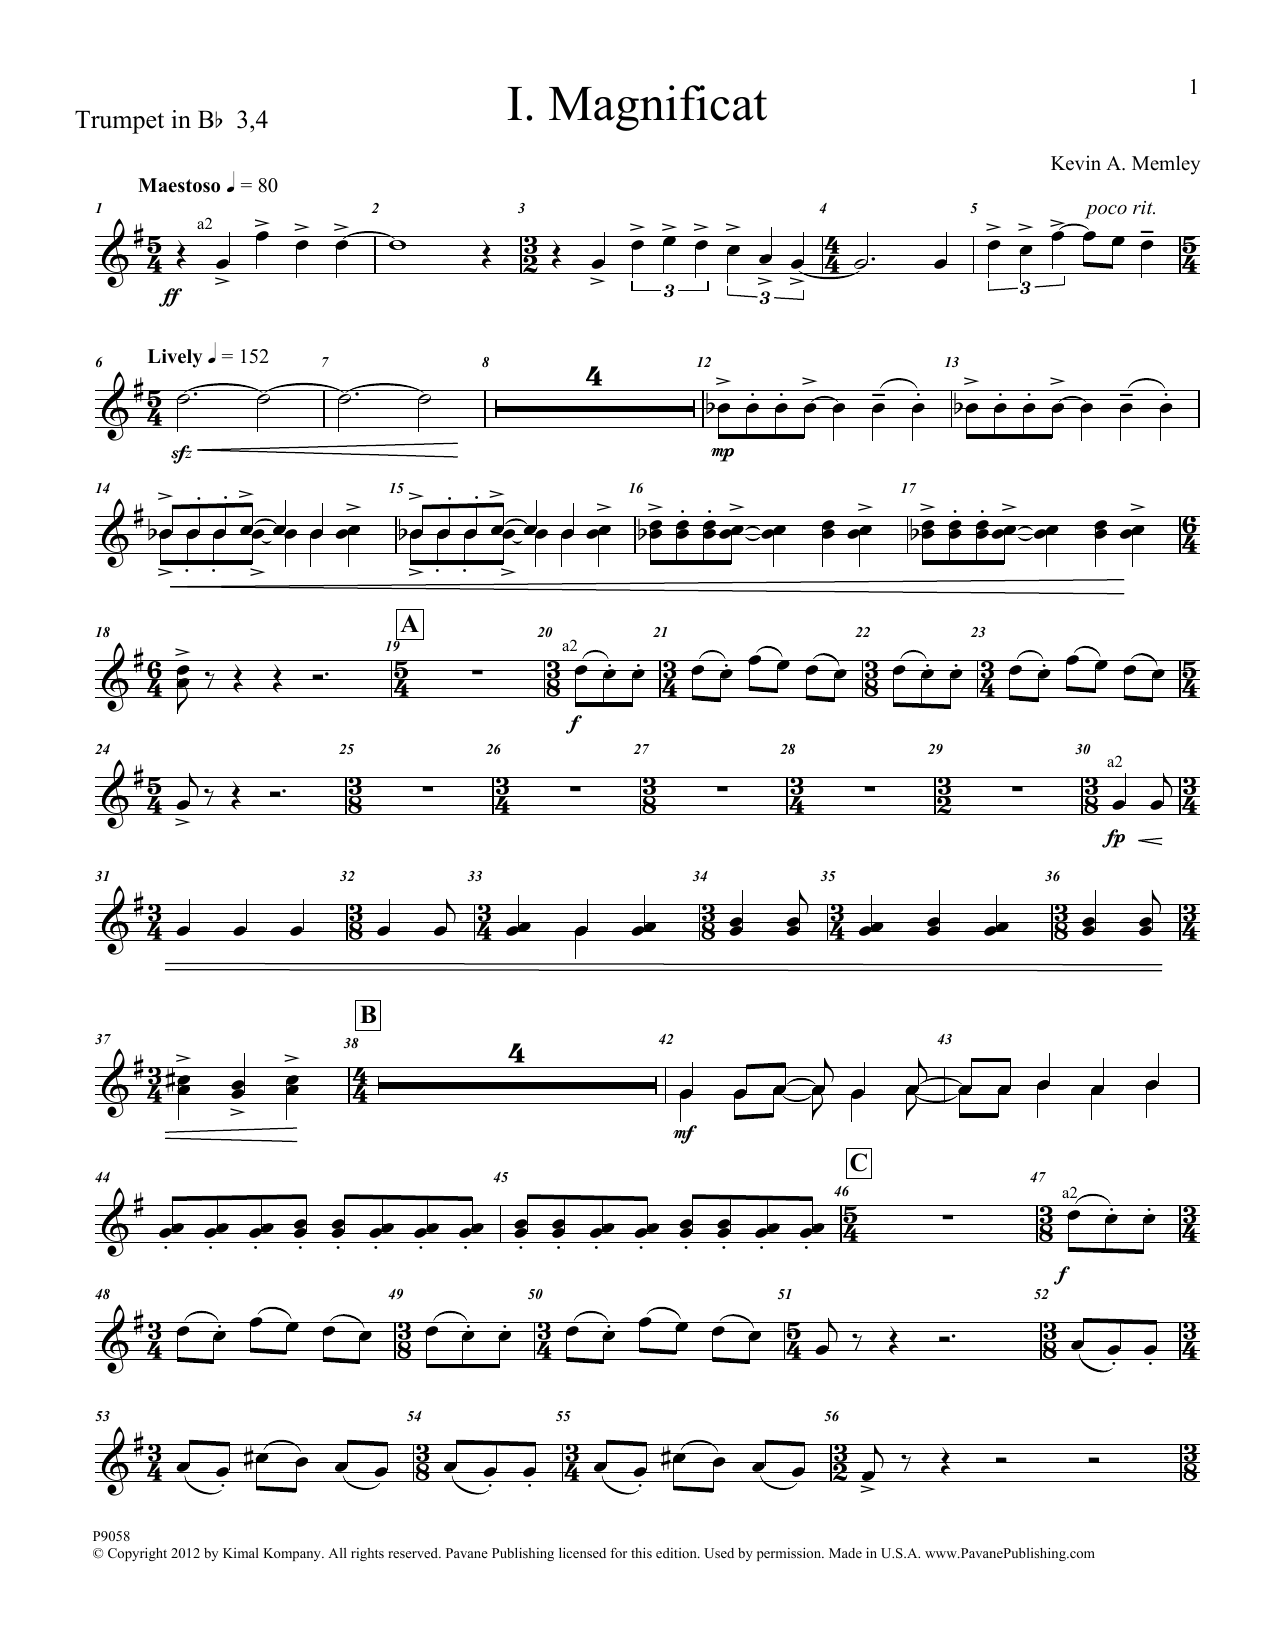 Download Kevin Memley Magnificat (Brass and Percussion) (Part Sheet Music